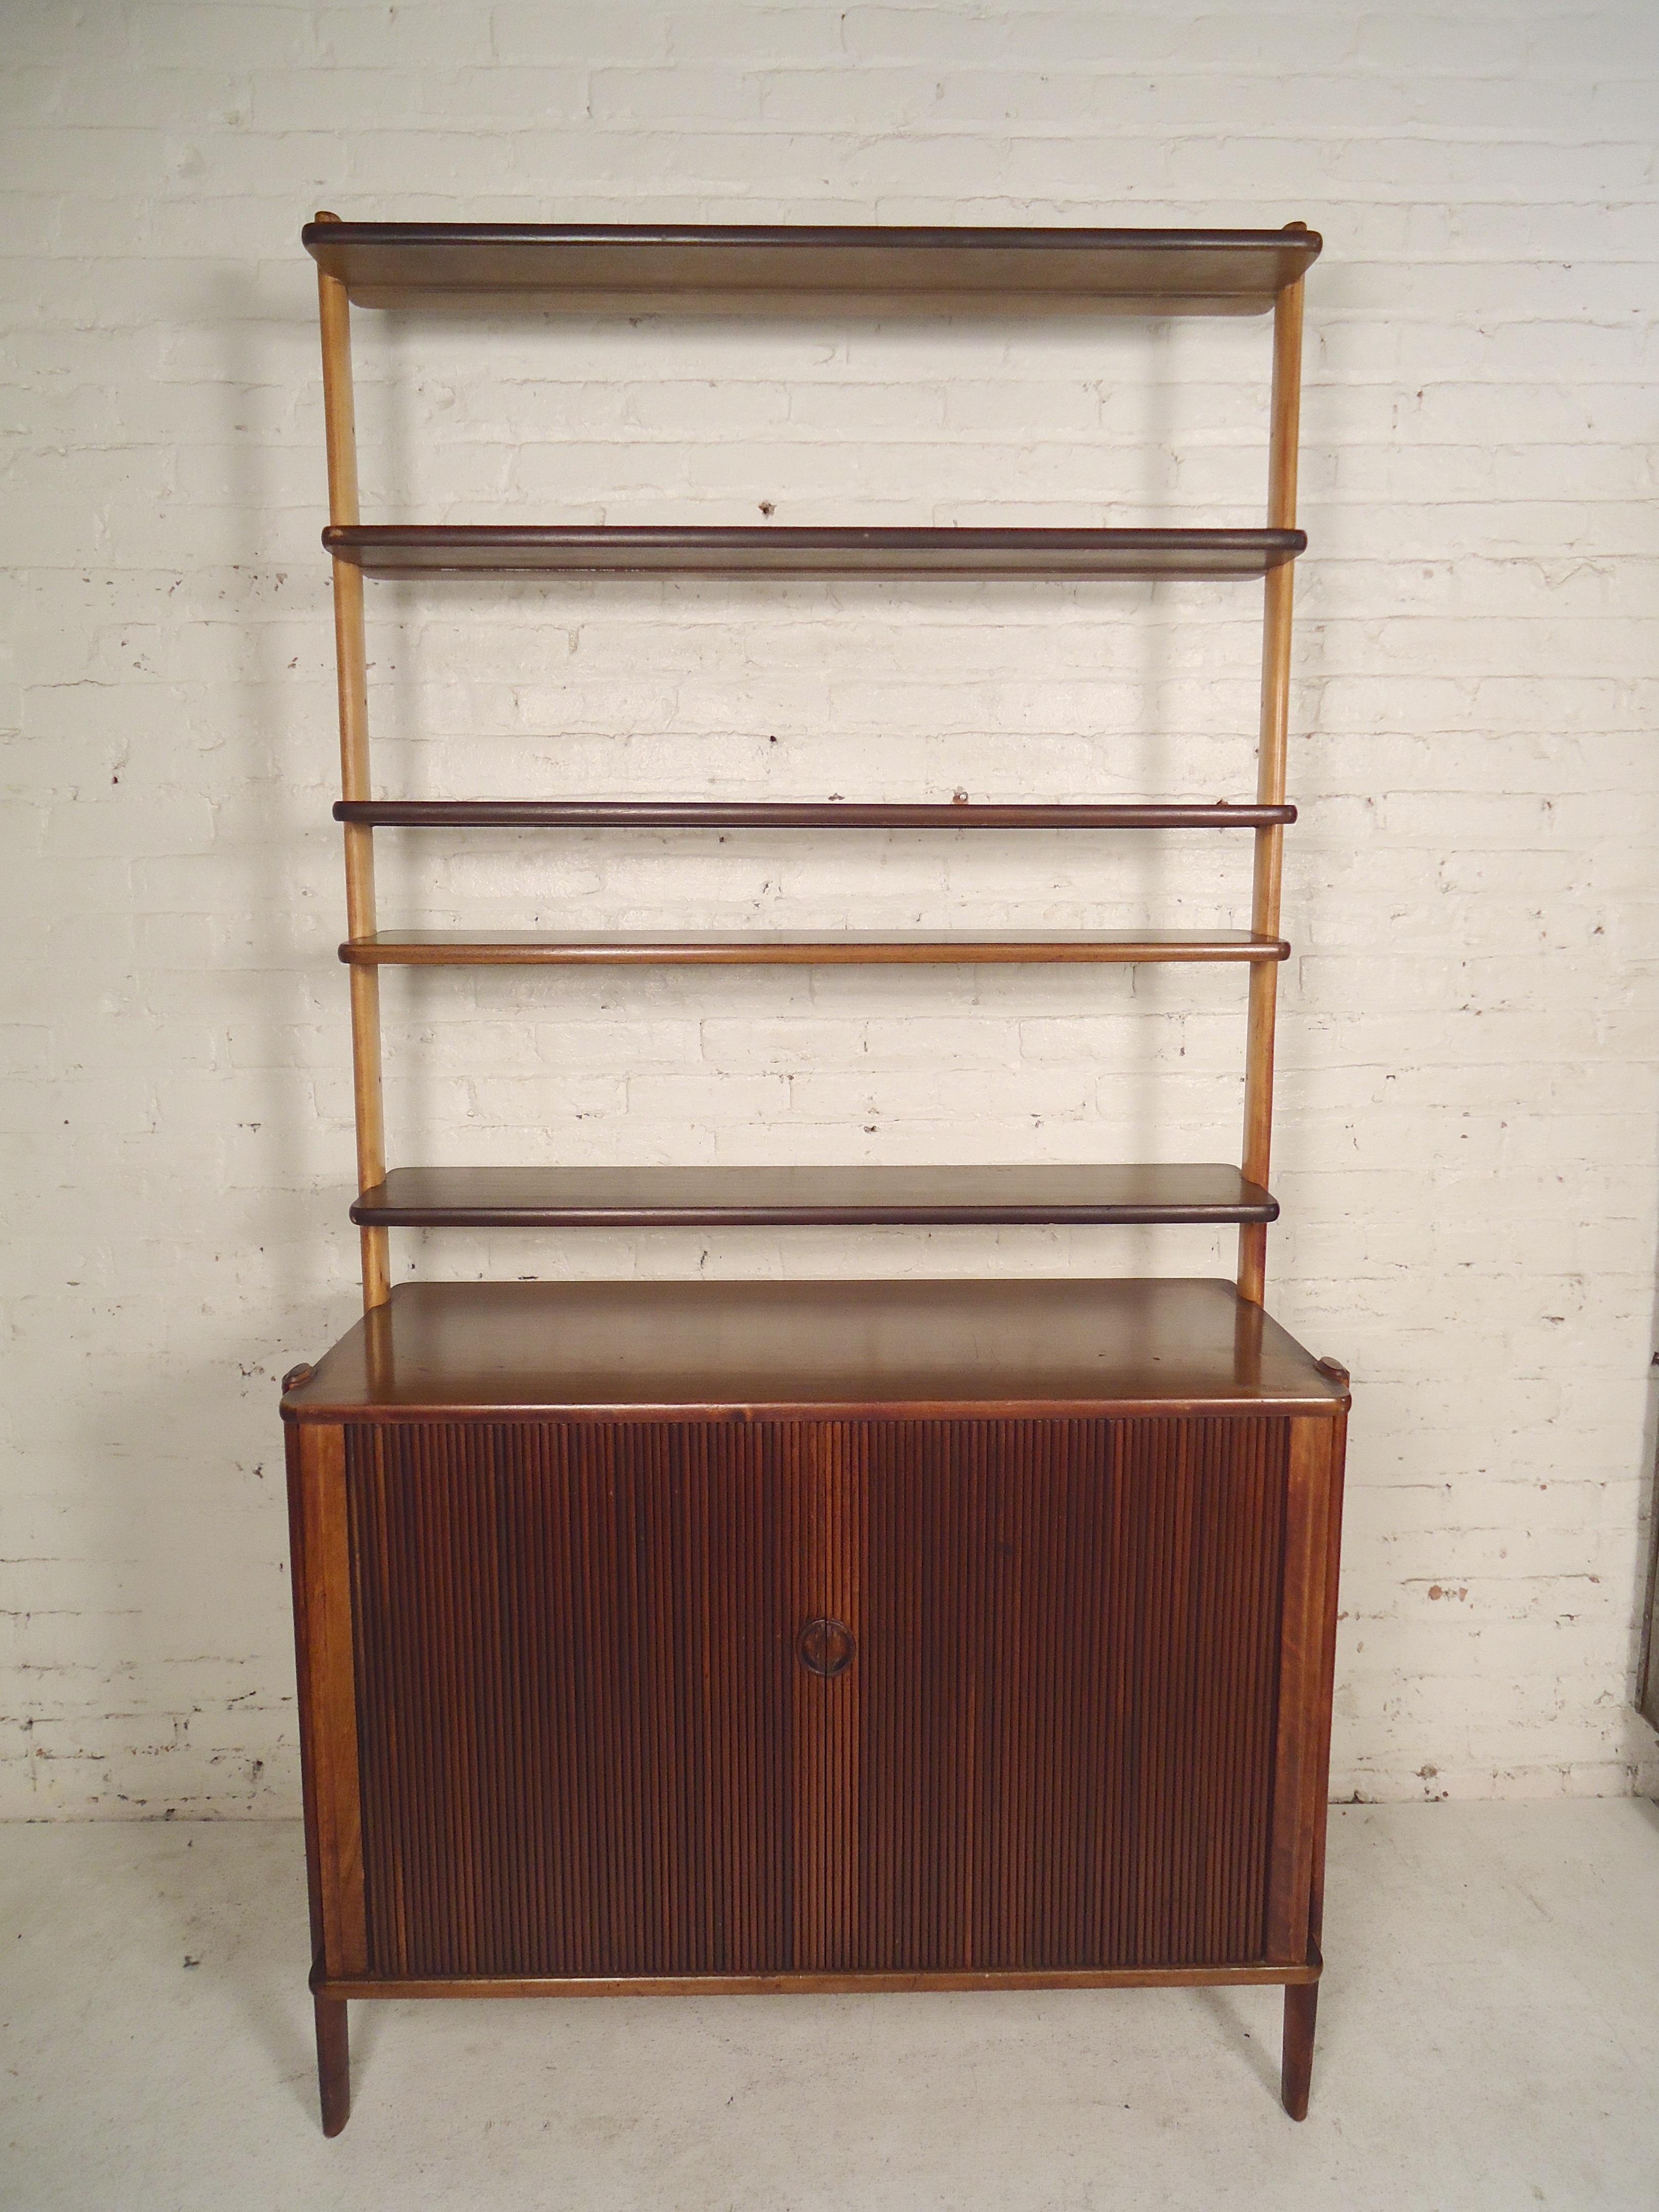 Standing shelving unit with tambour door storage base. Adjustable shelves, cabinet storage, great for home or office.

(Please confirm item location - NY or NJ - with dealer).
      